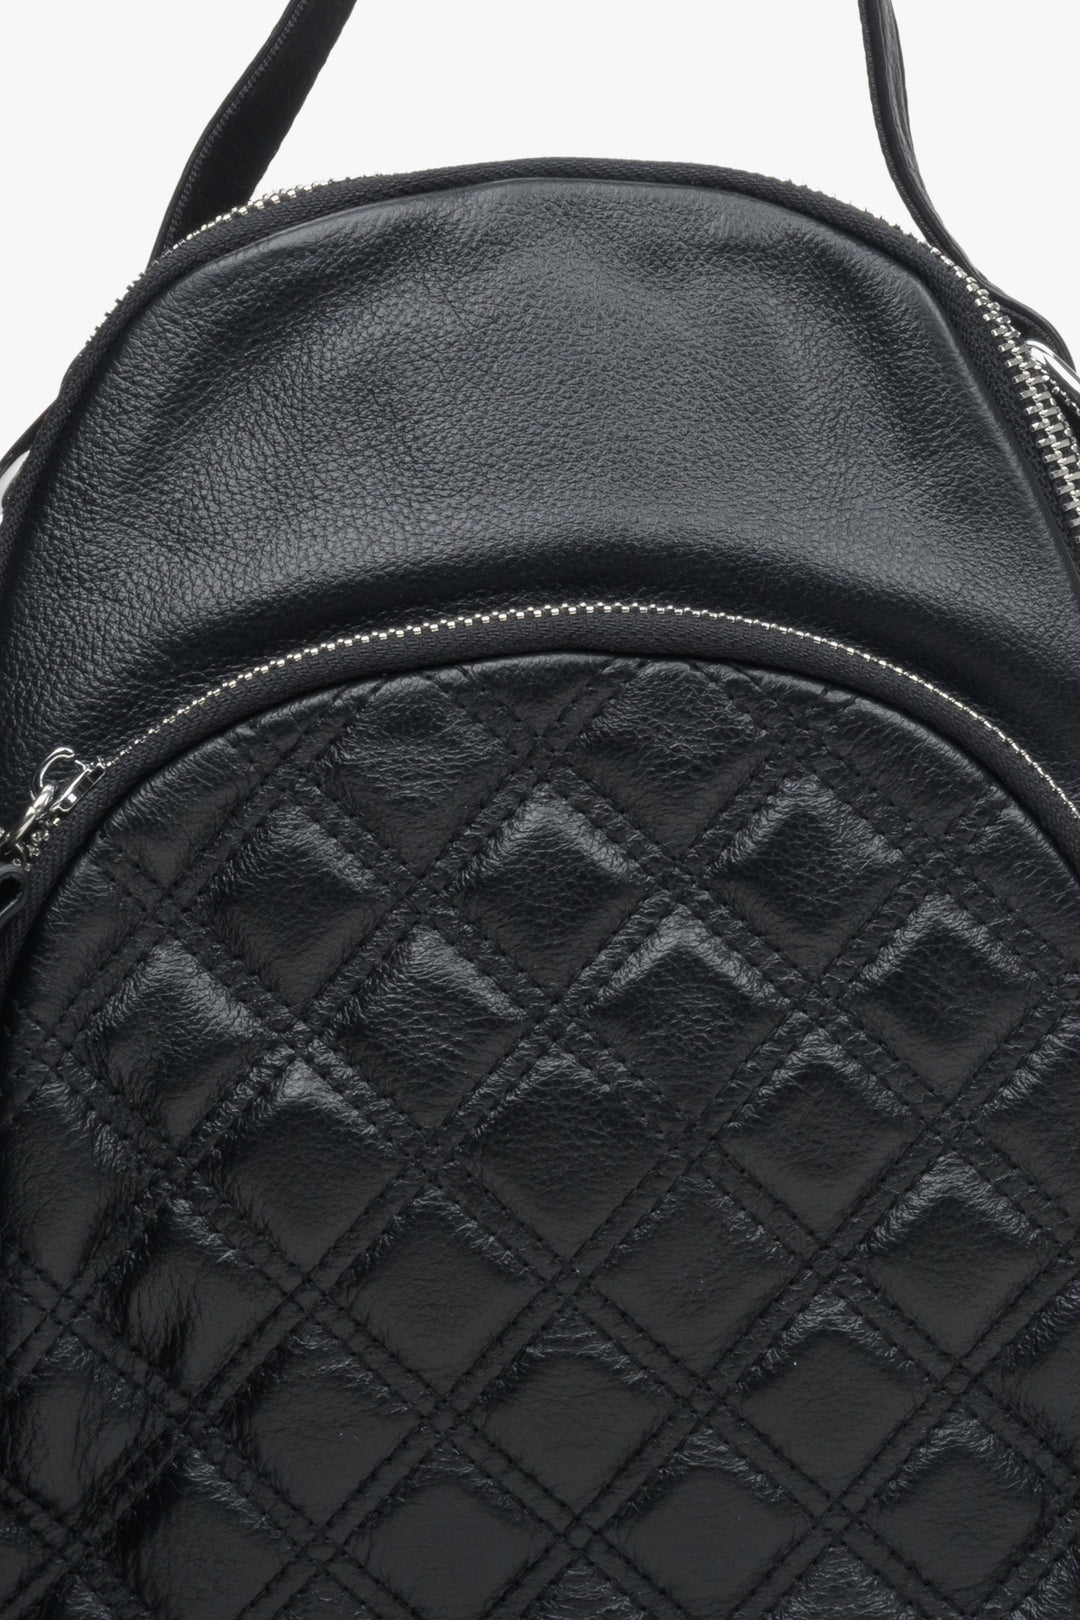 Genuine leather, small women's backpack by Estro in black - close-up on the details.